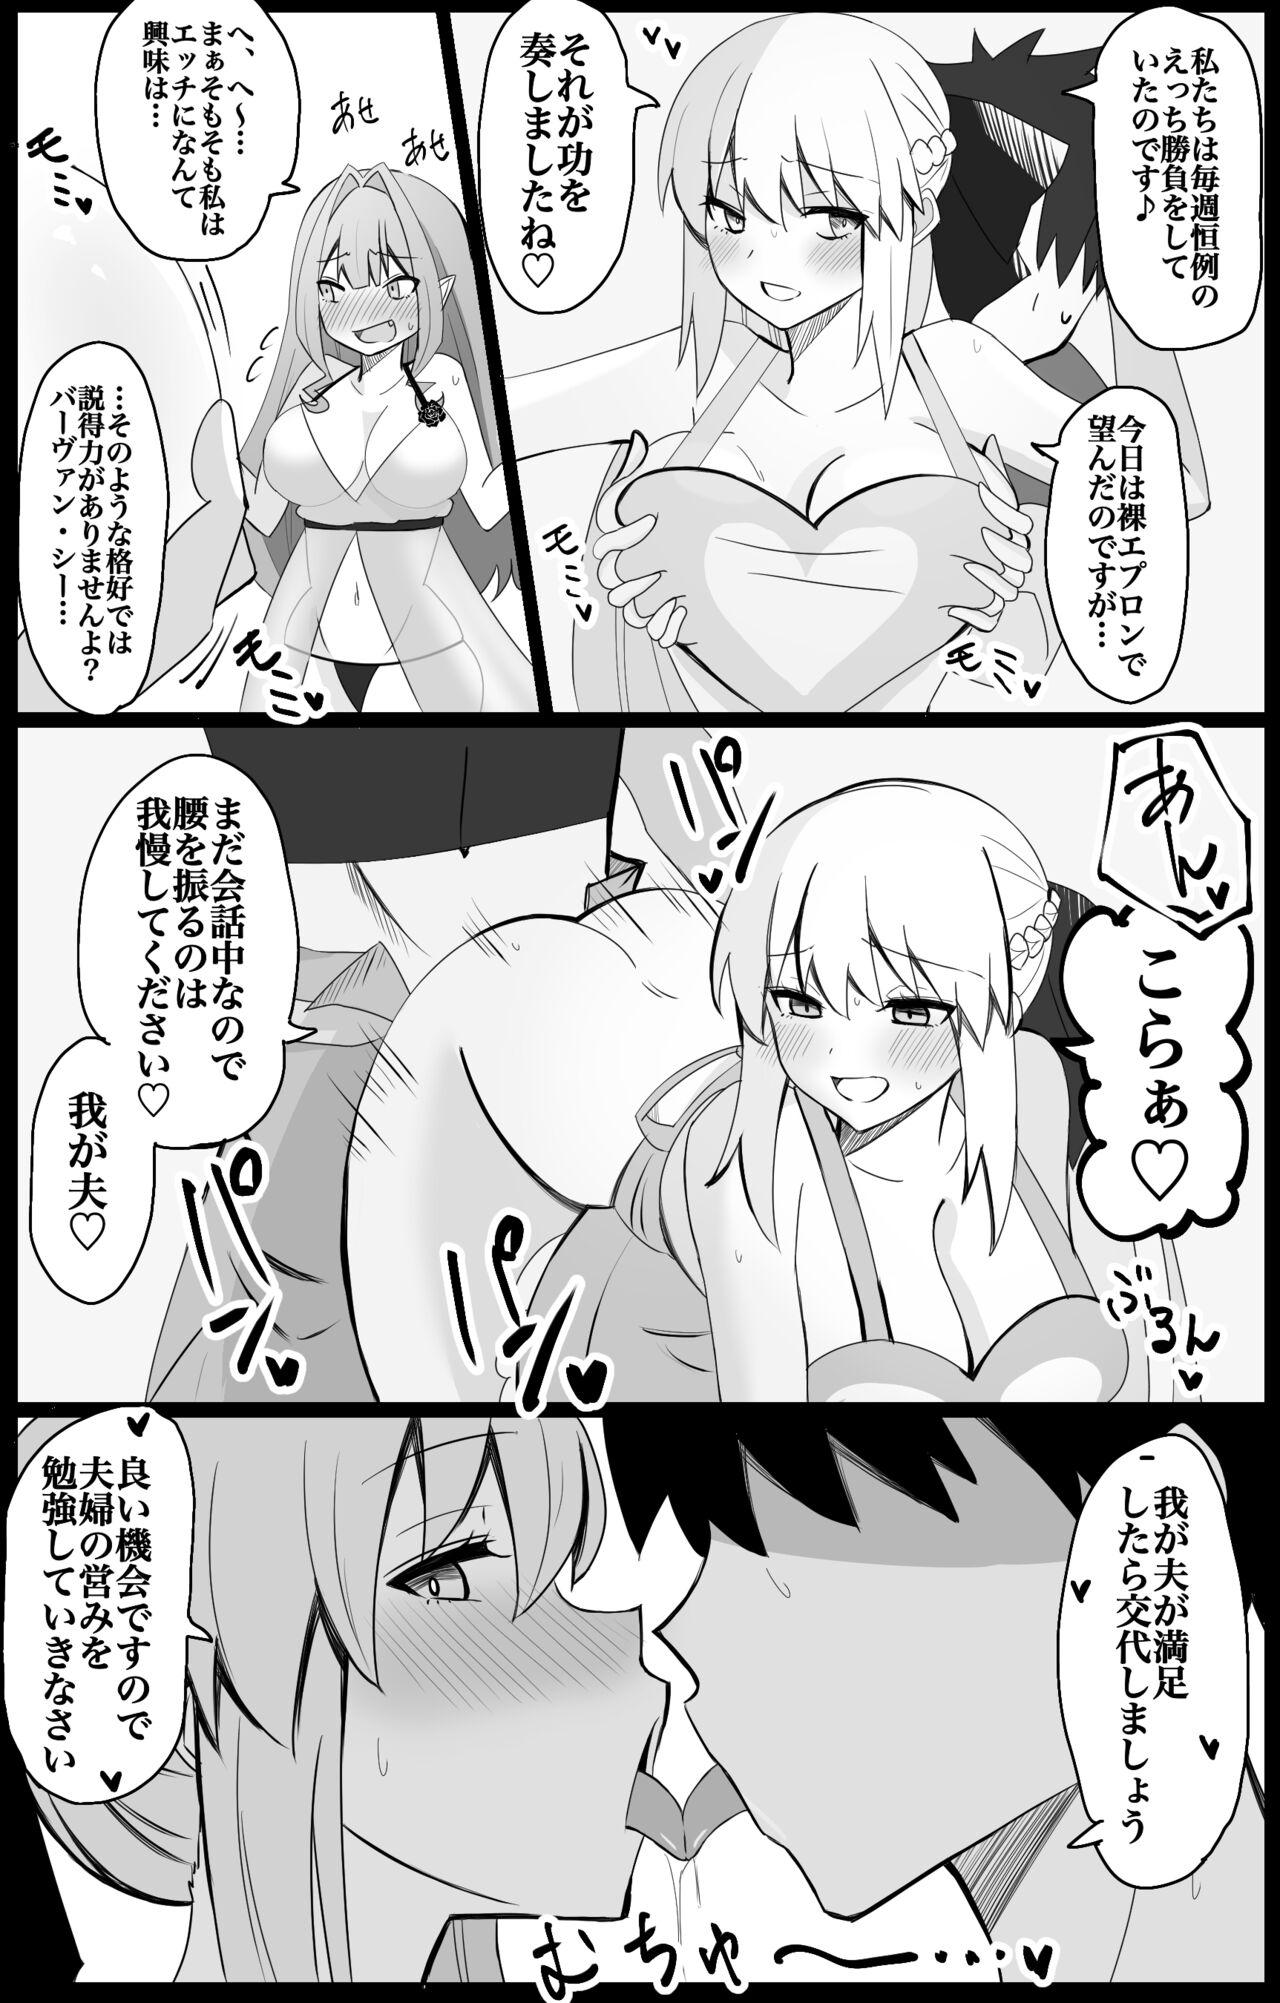 Lovers MorTri Oyakodon - Fate grand order Picked Up - Page 2